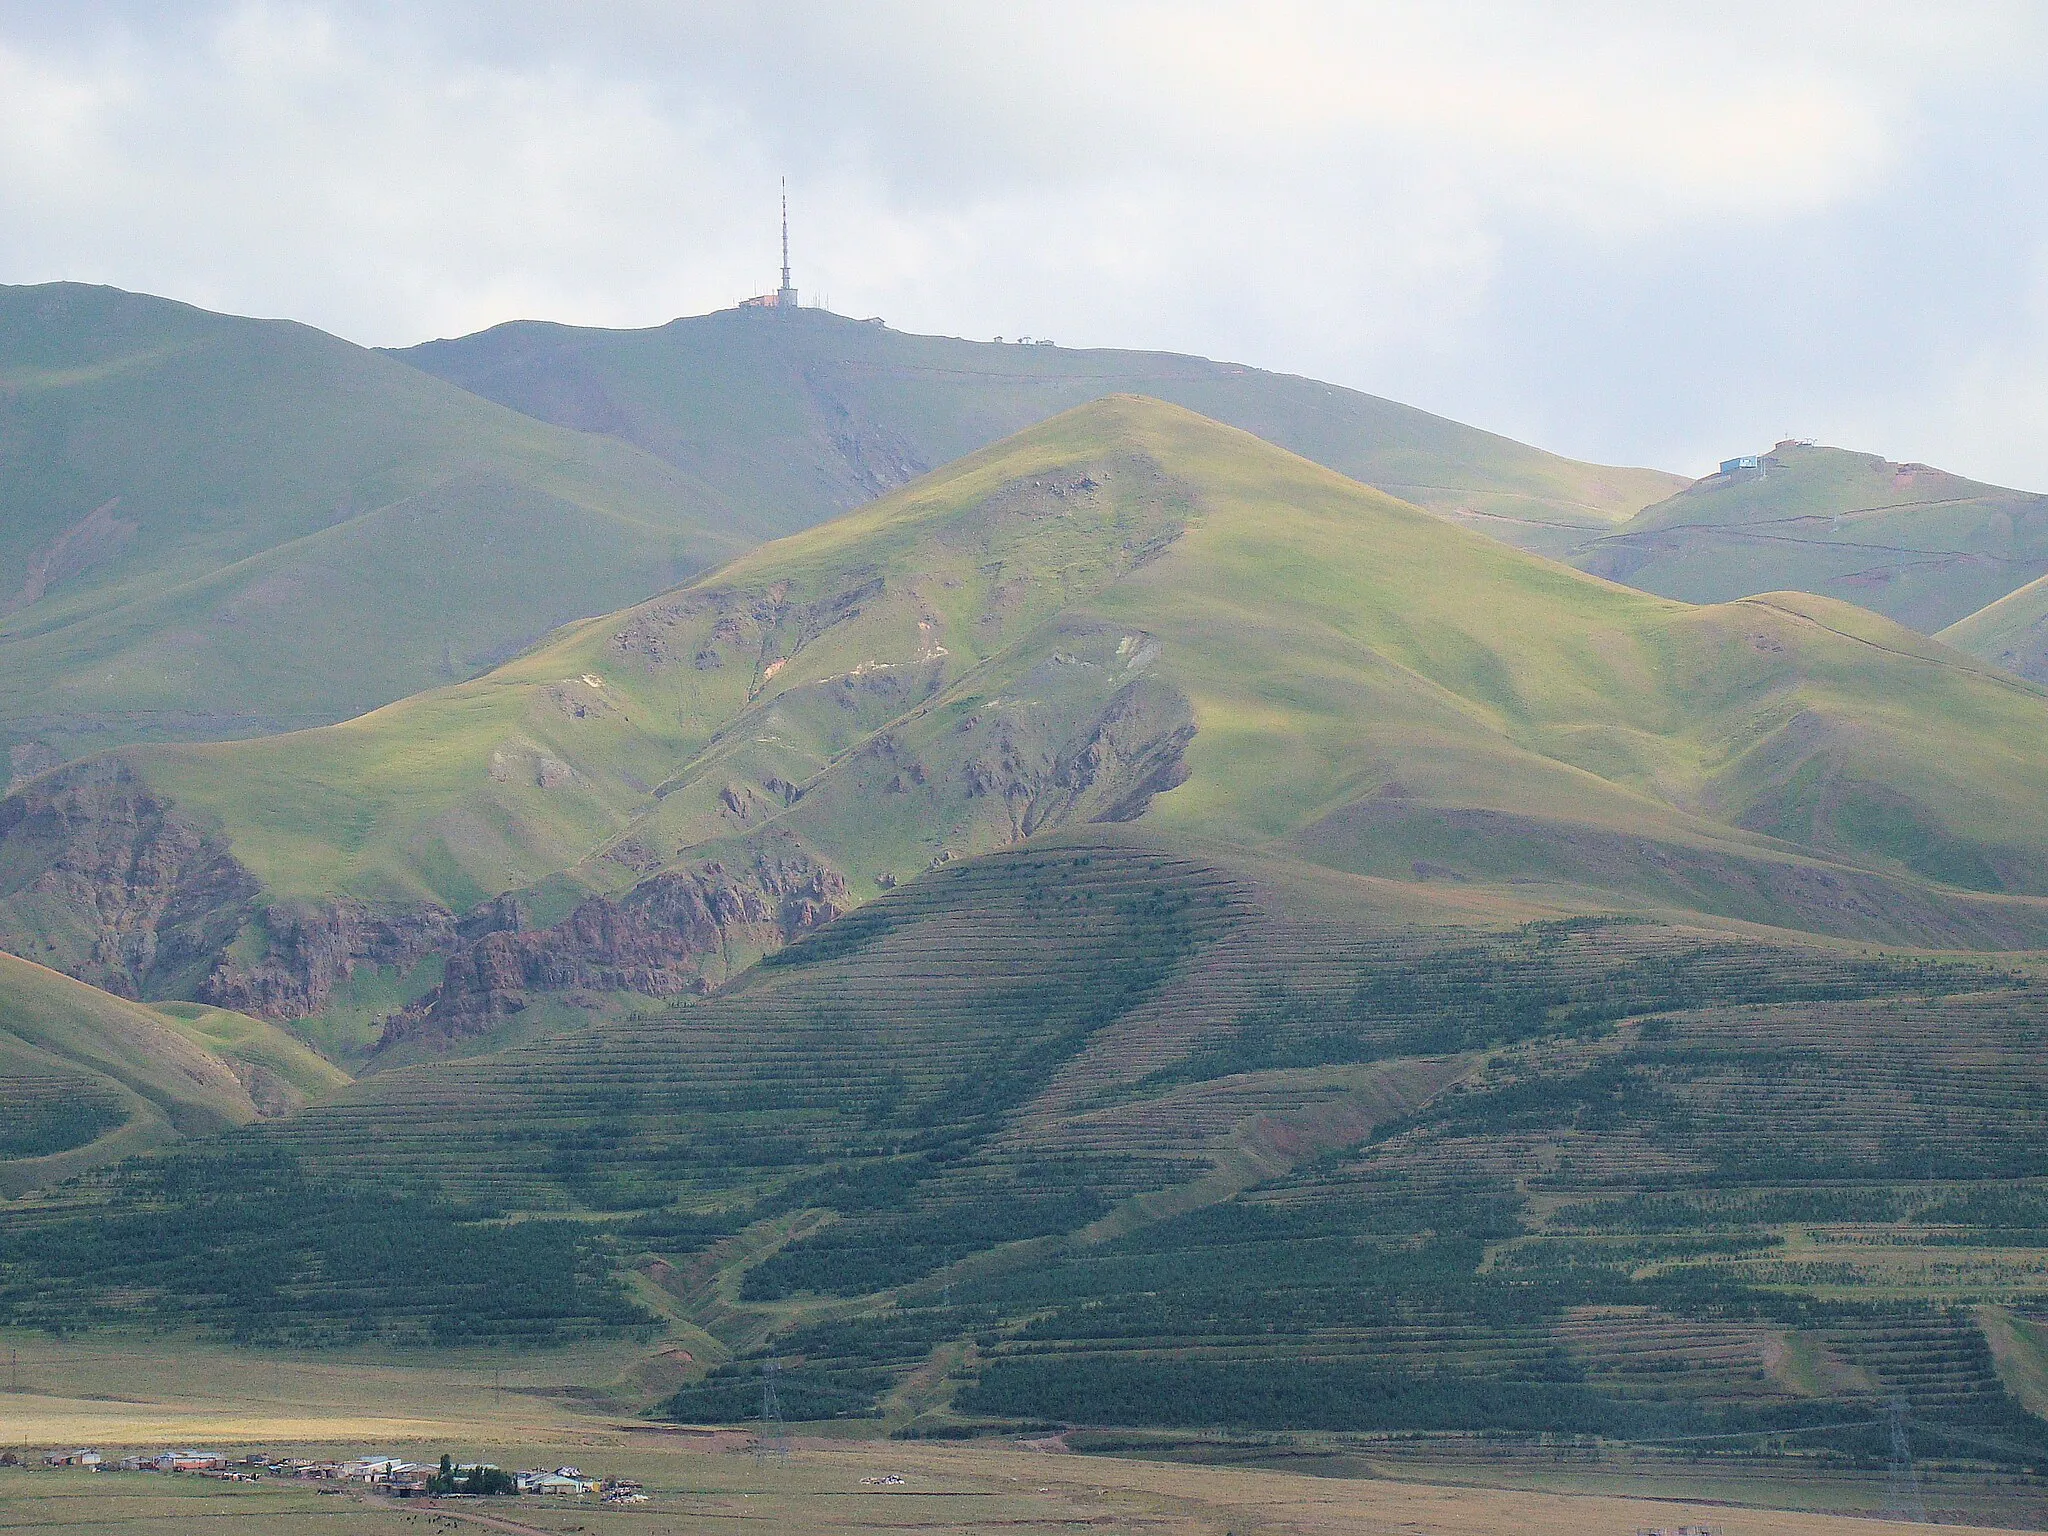 Photo showing: The mountain Palandöken near Erzurum, Turkey, is one of the best spots in Turkey for downhill skiing. During the summer this is what the mountain looks like from downtown Erzurum.